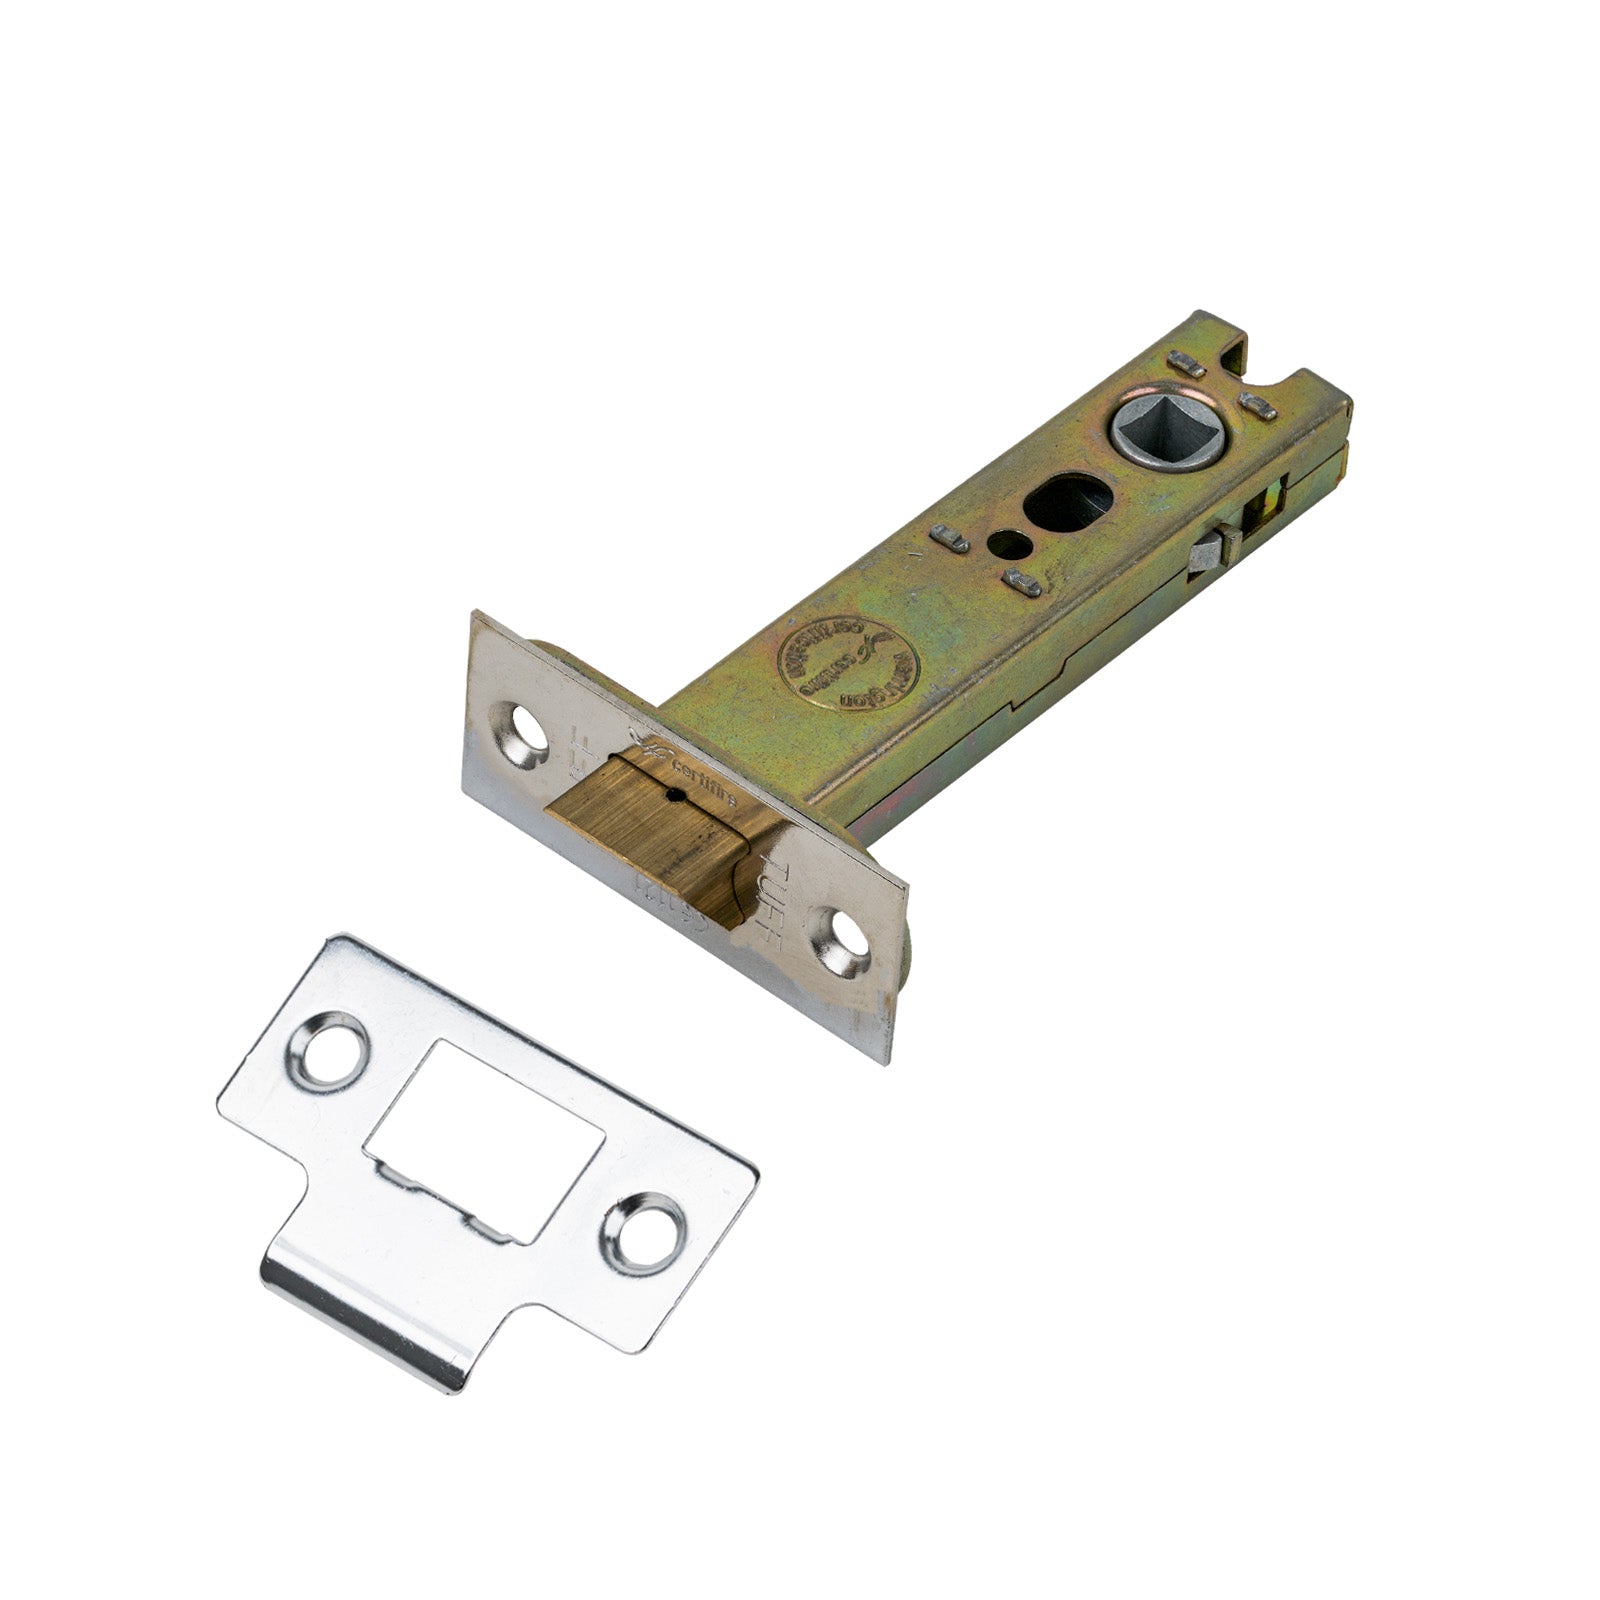 SHOW Heavy Duty Tubular Latch - 4 Inch with Polished Chrome finished forend and striker plate